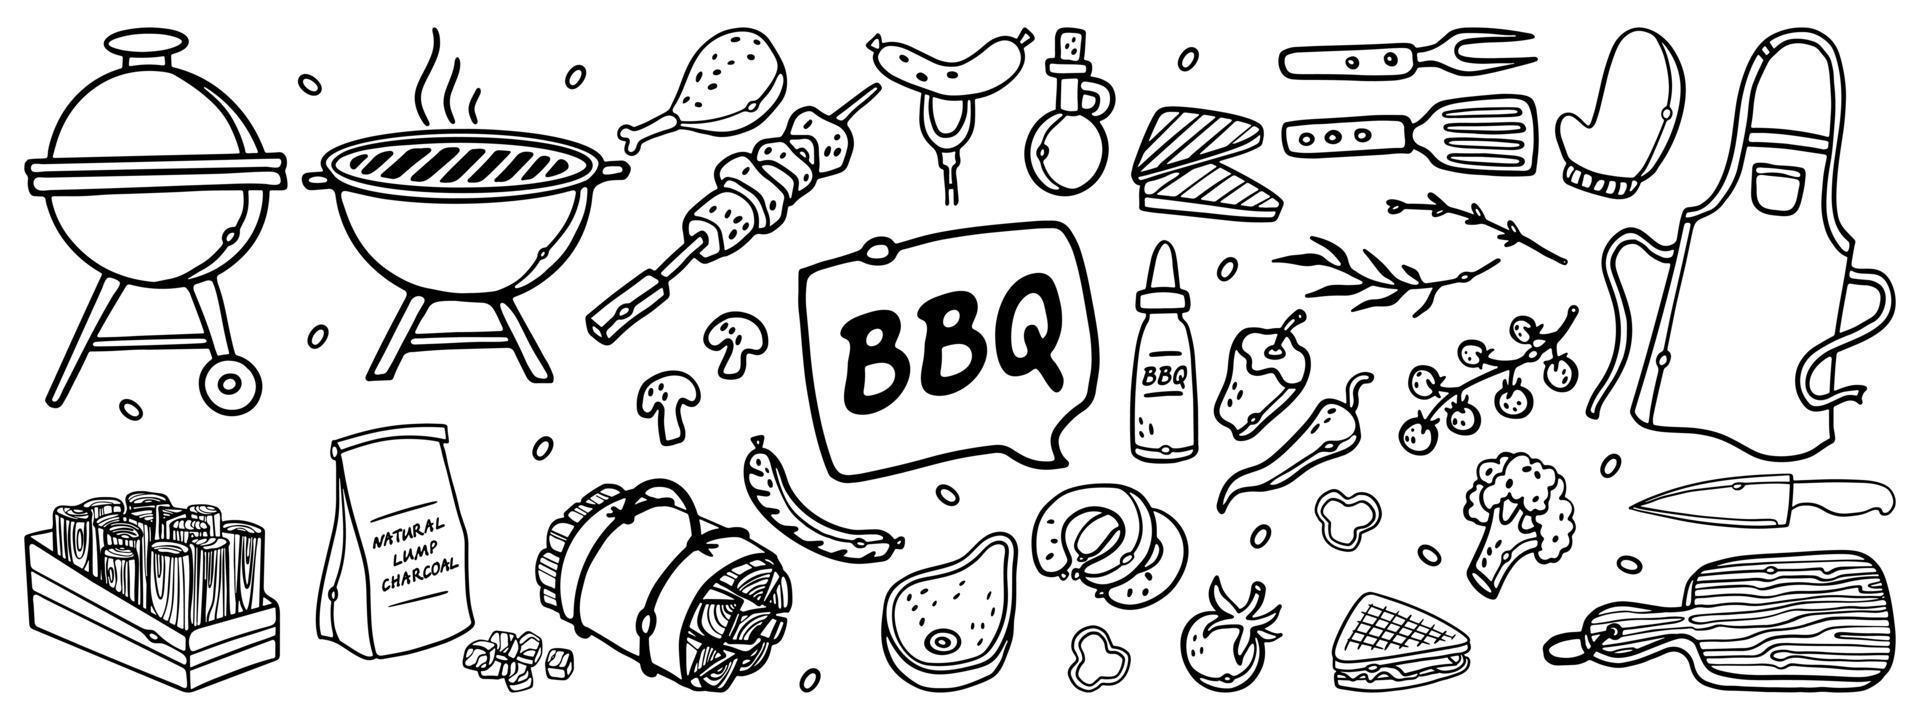 Barbecue grill hand-drawn outline doodle Set. BBQ Vector Illustration Barbecue party Sketch. Barbeque tools charcoal firewood and products